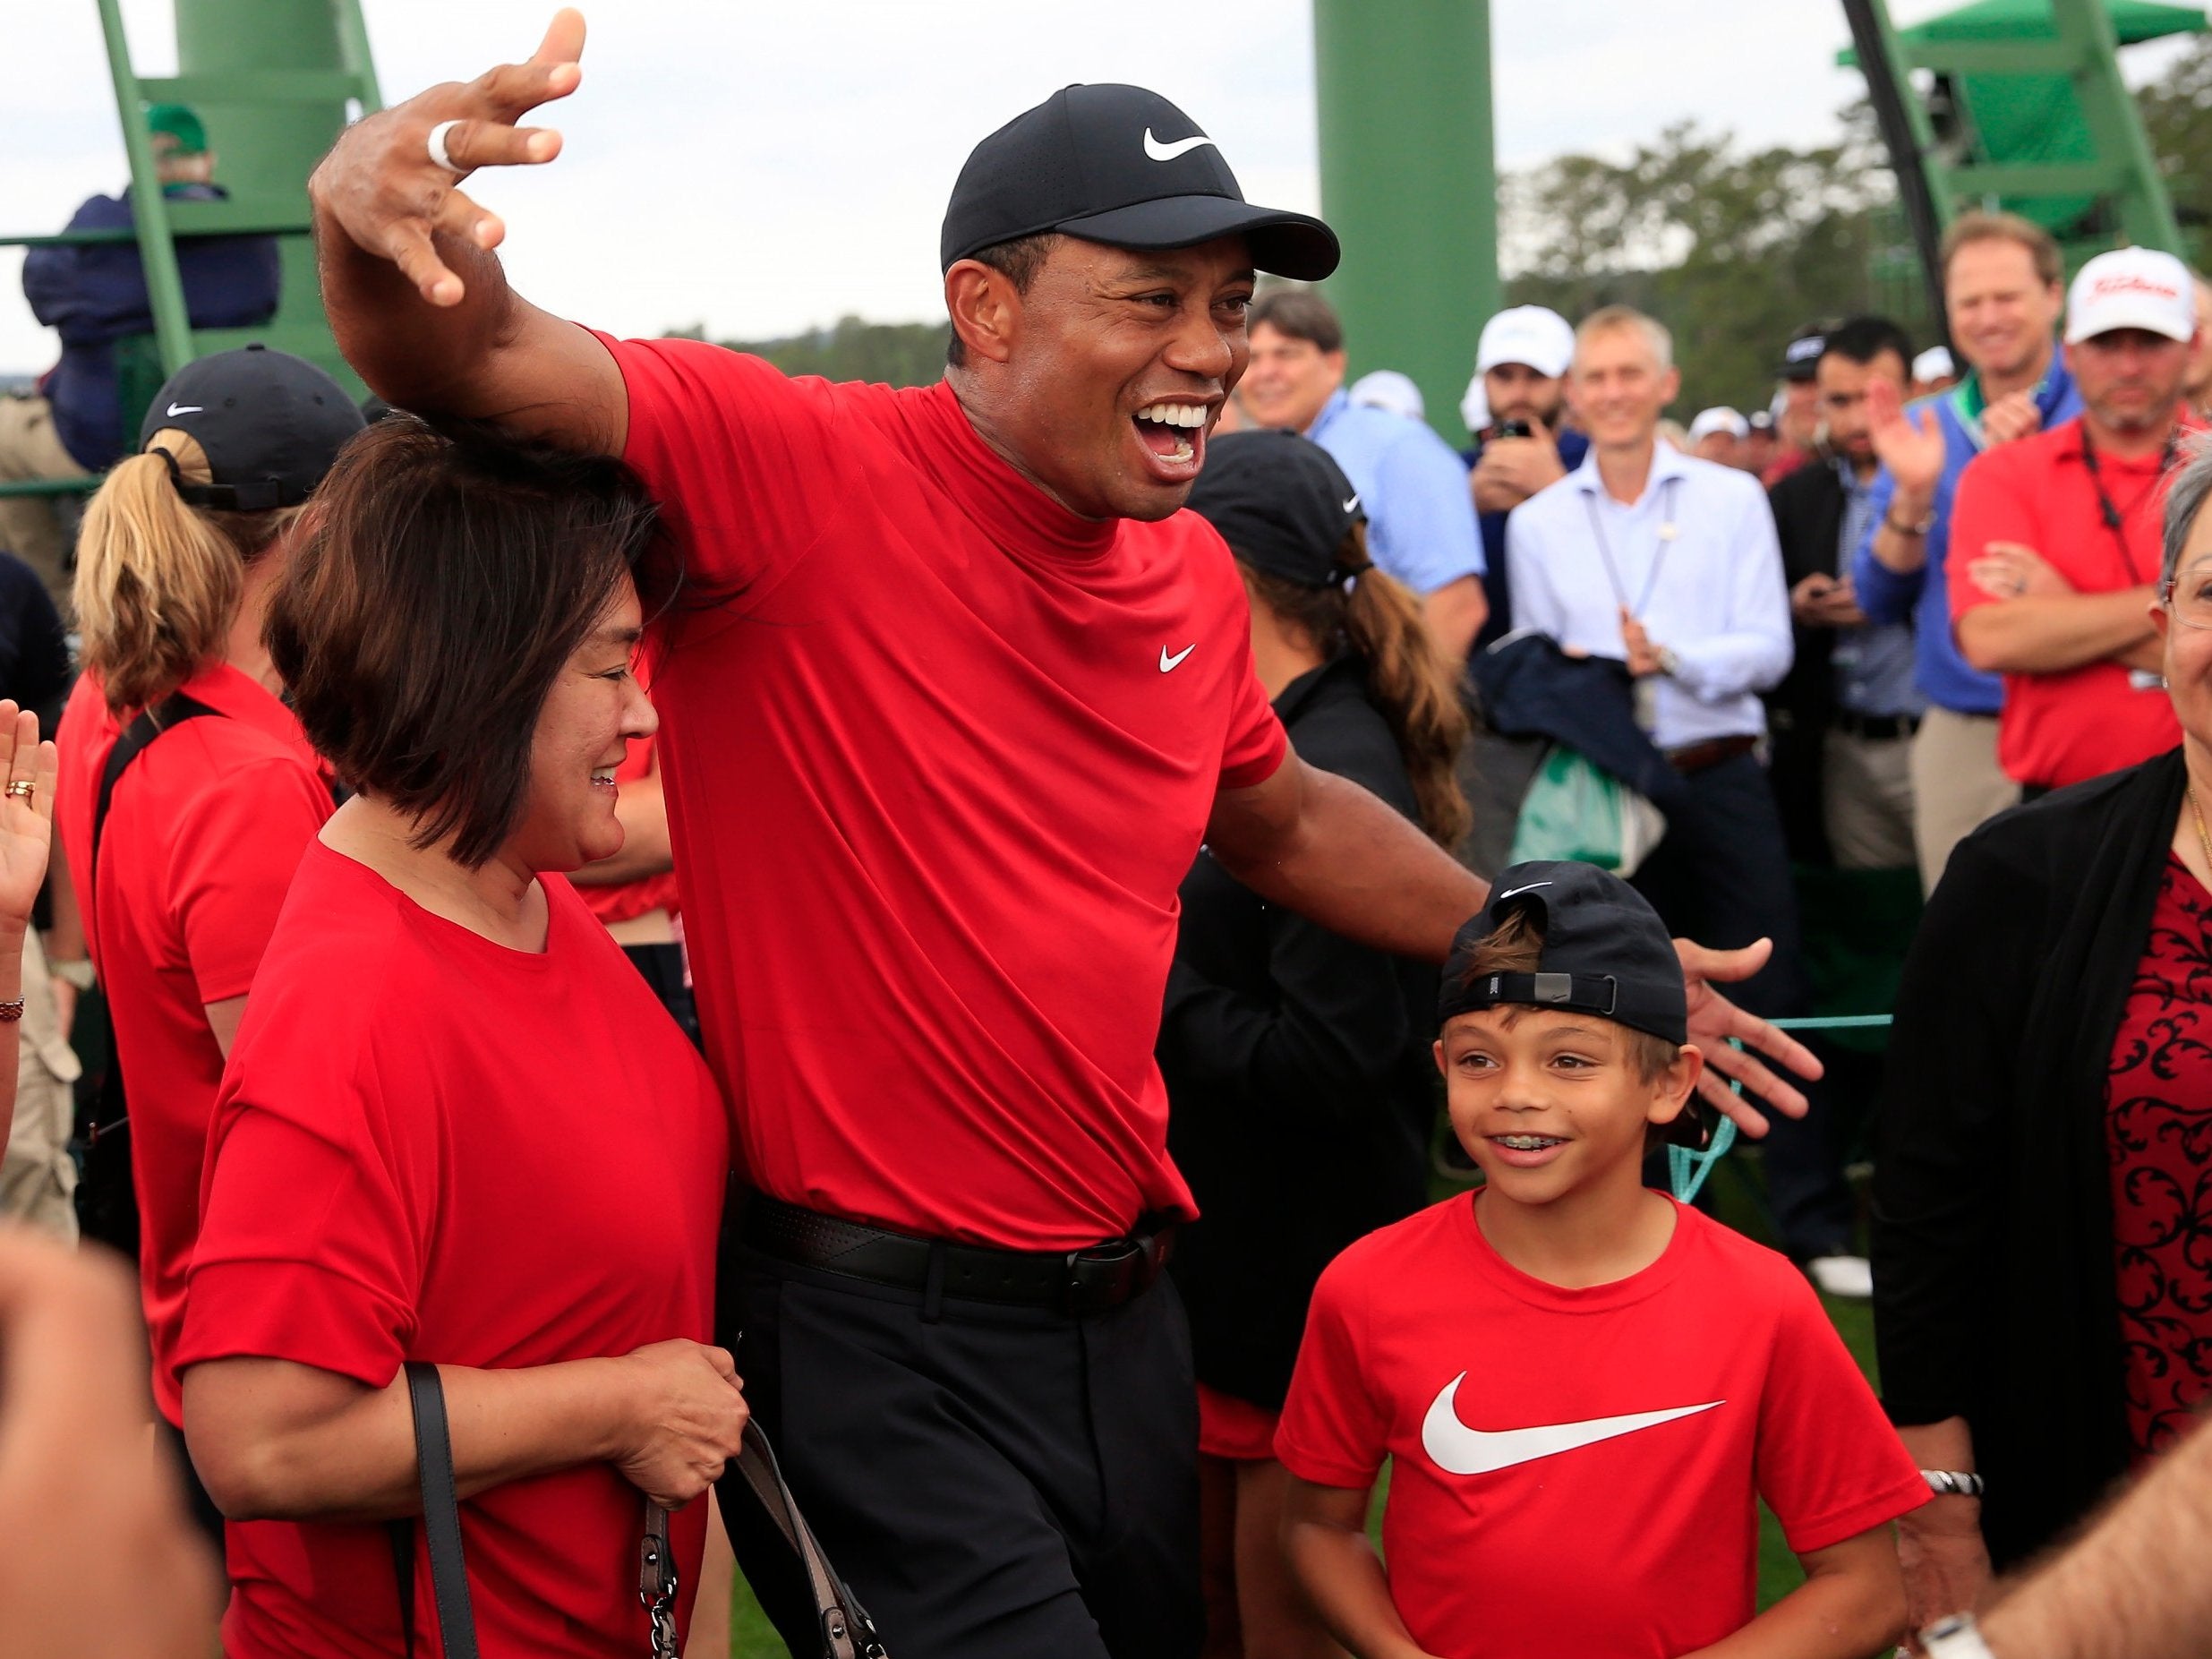 Woods claimed a fifth Masters title earlier this month